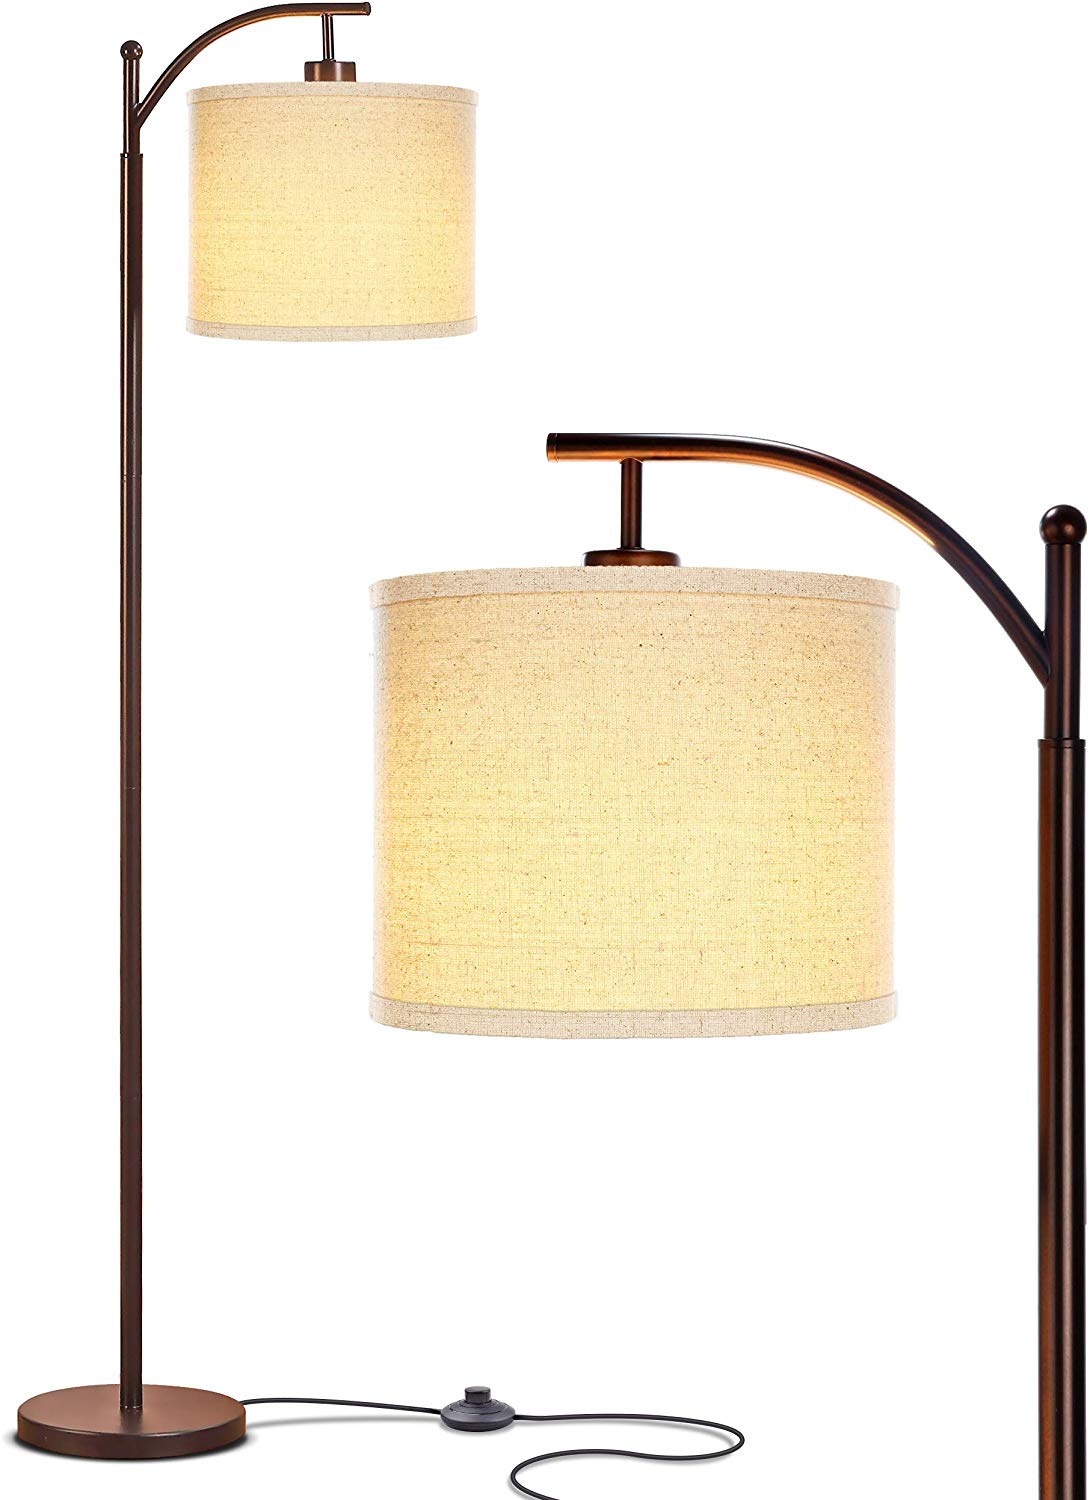 Brightech LED Floor Lamp with Hanging Shade